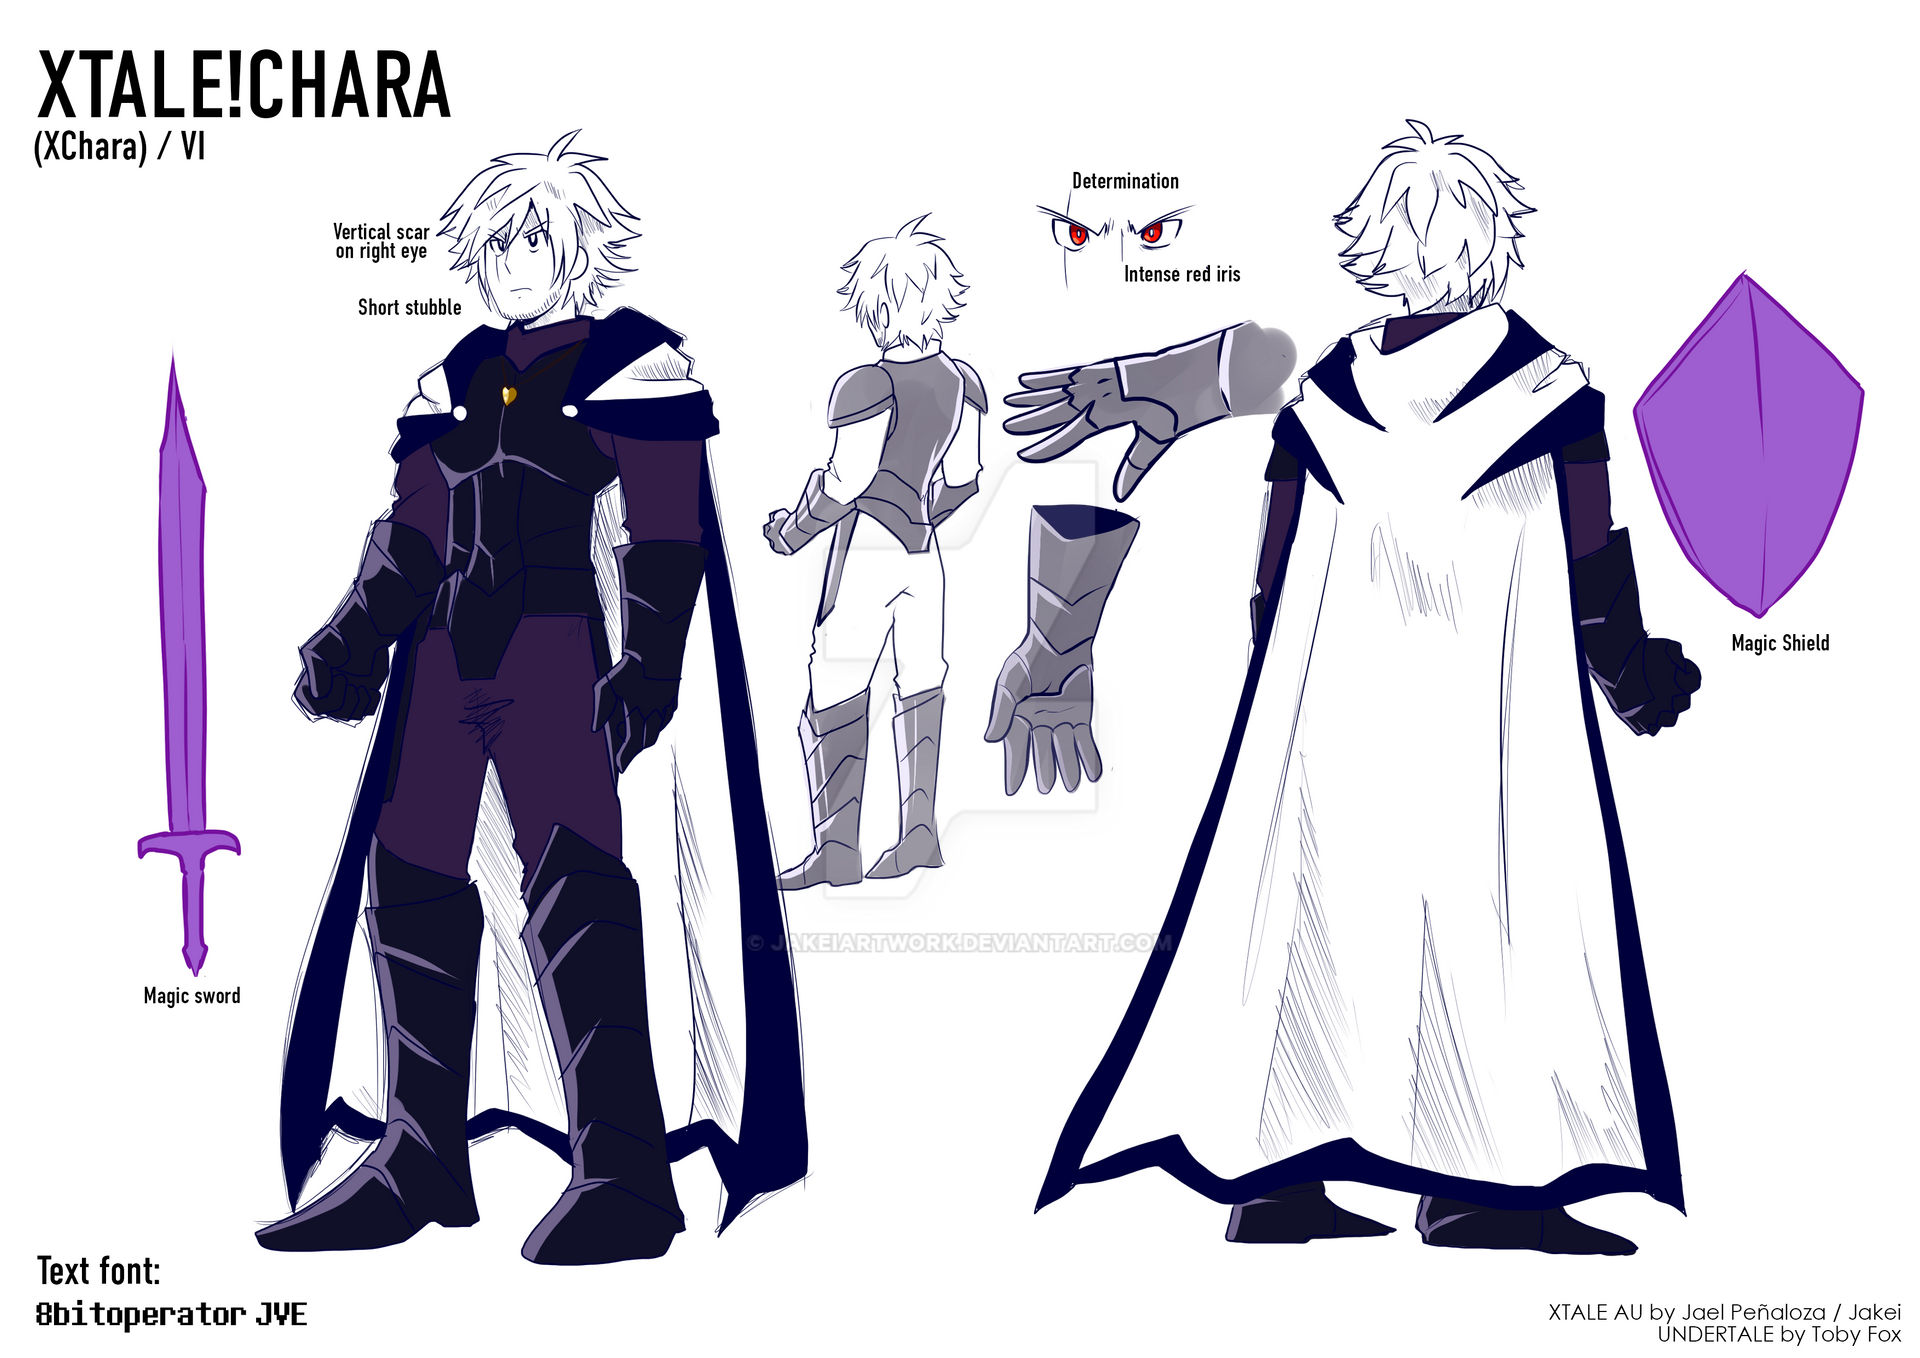 XTALE CHARA Reference Sheet 1 by JakeiArtwork on DeviantArt